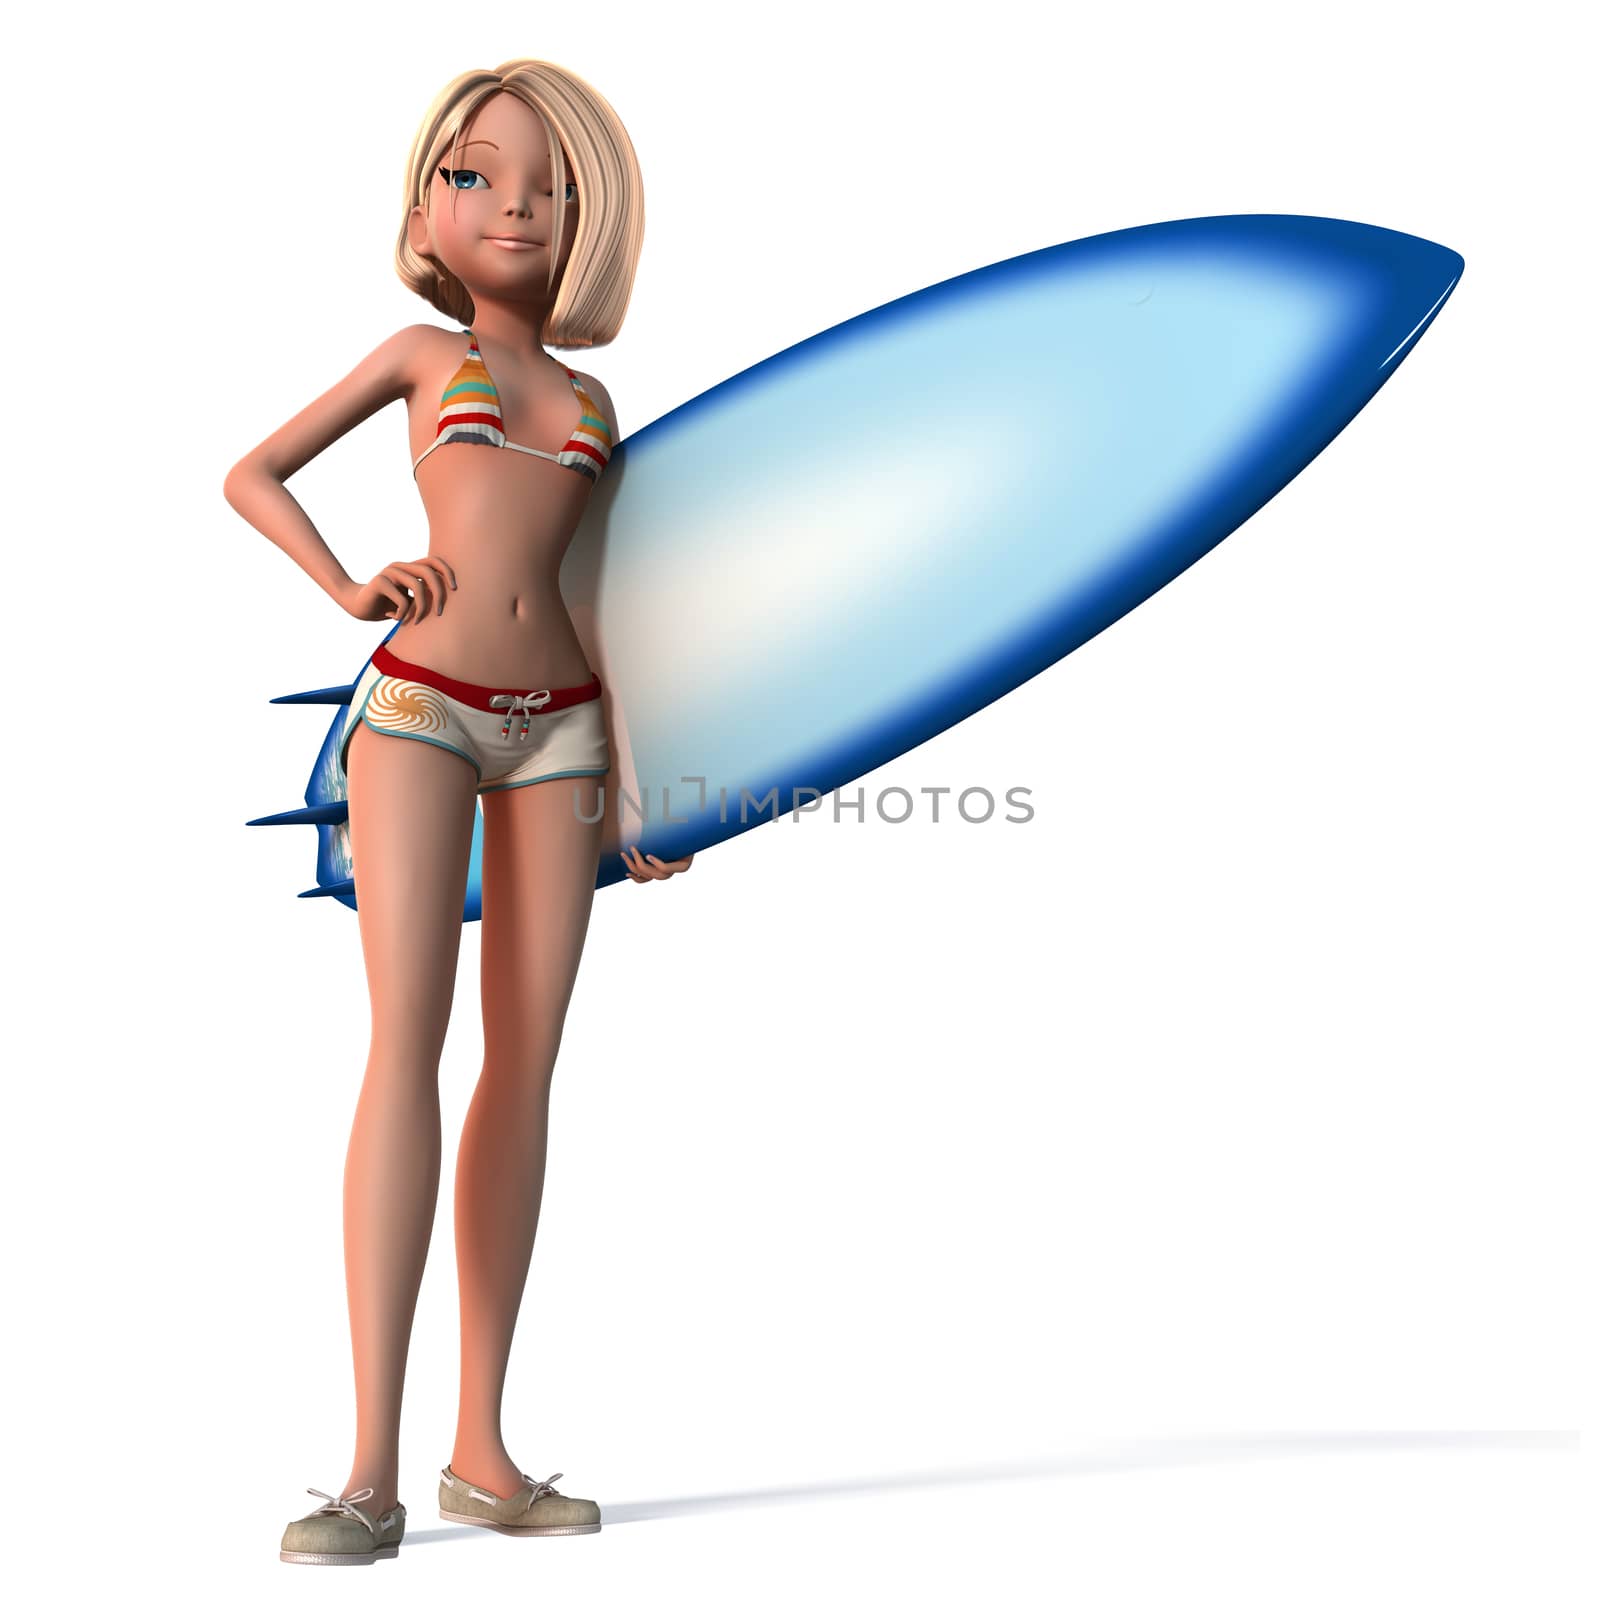 A young girl in a bathing suit with a board for windsurfing